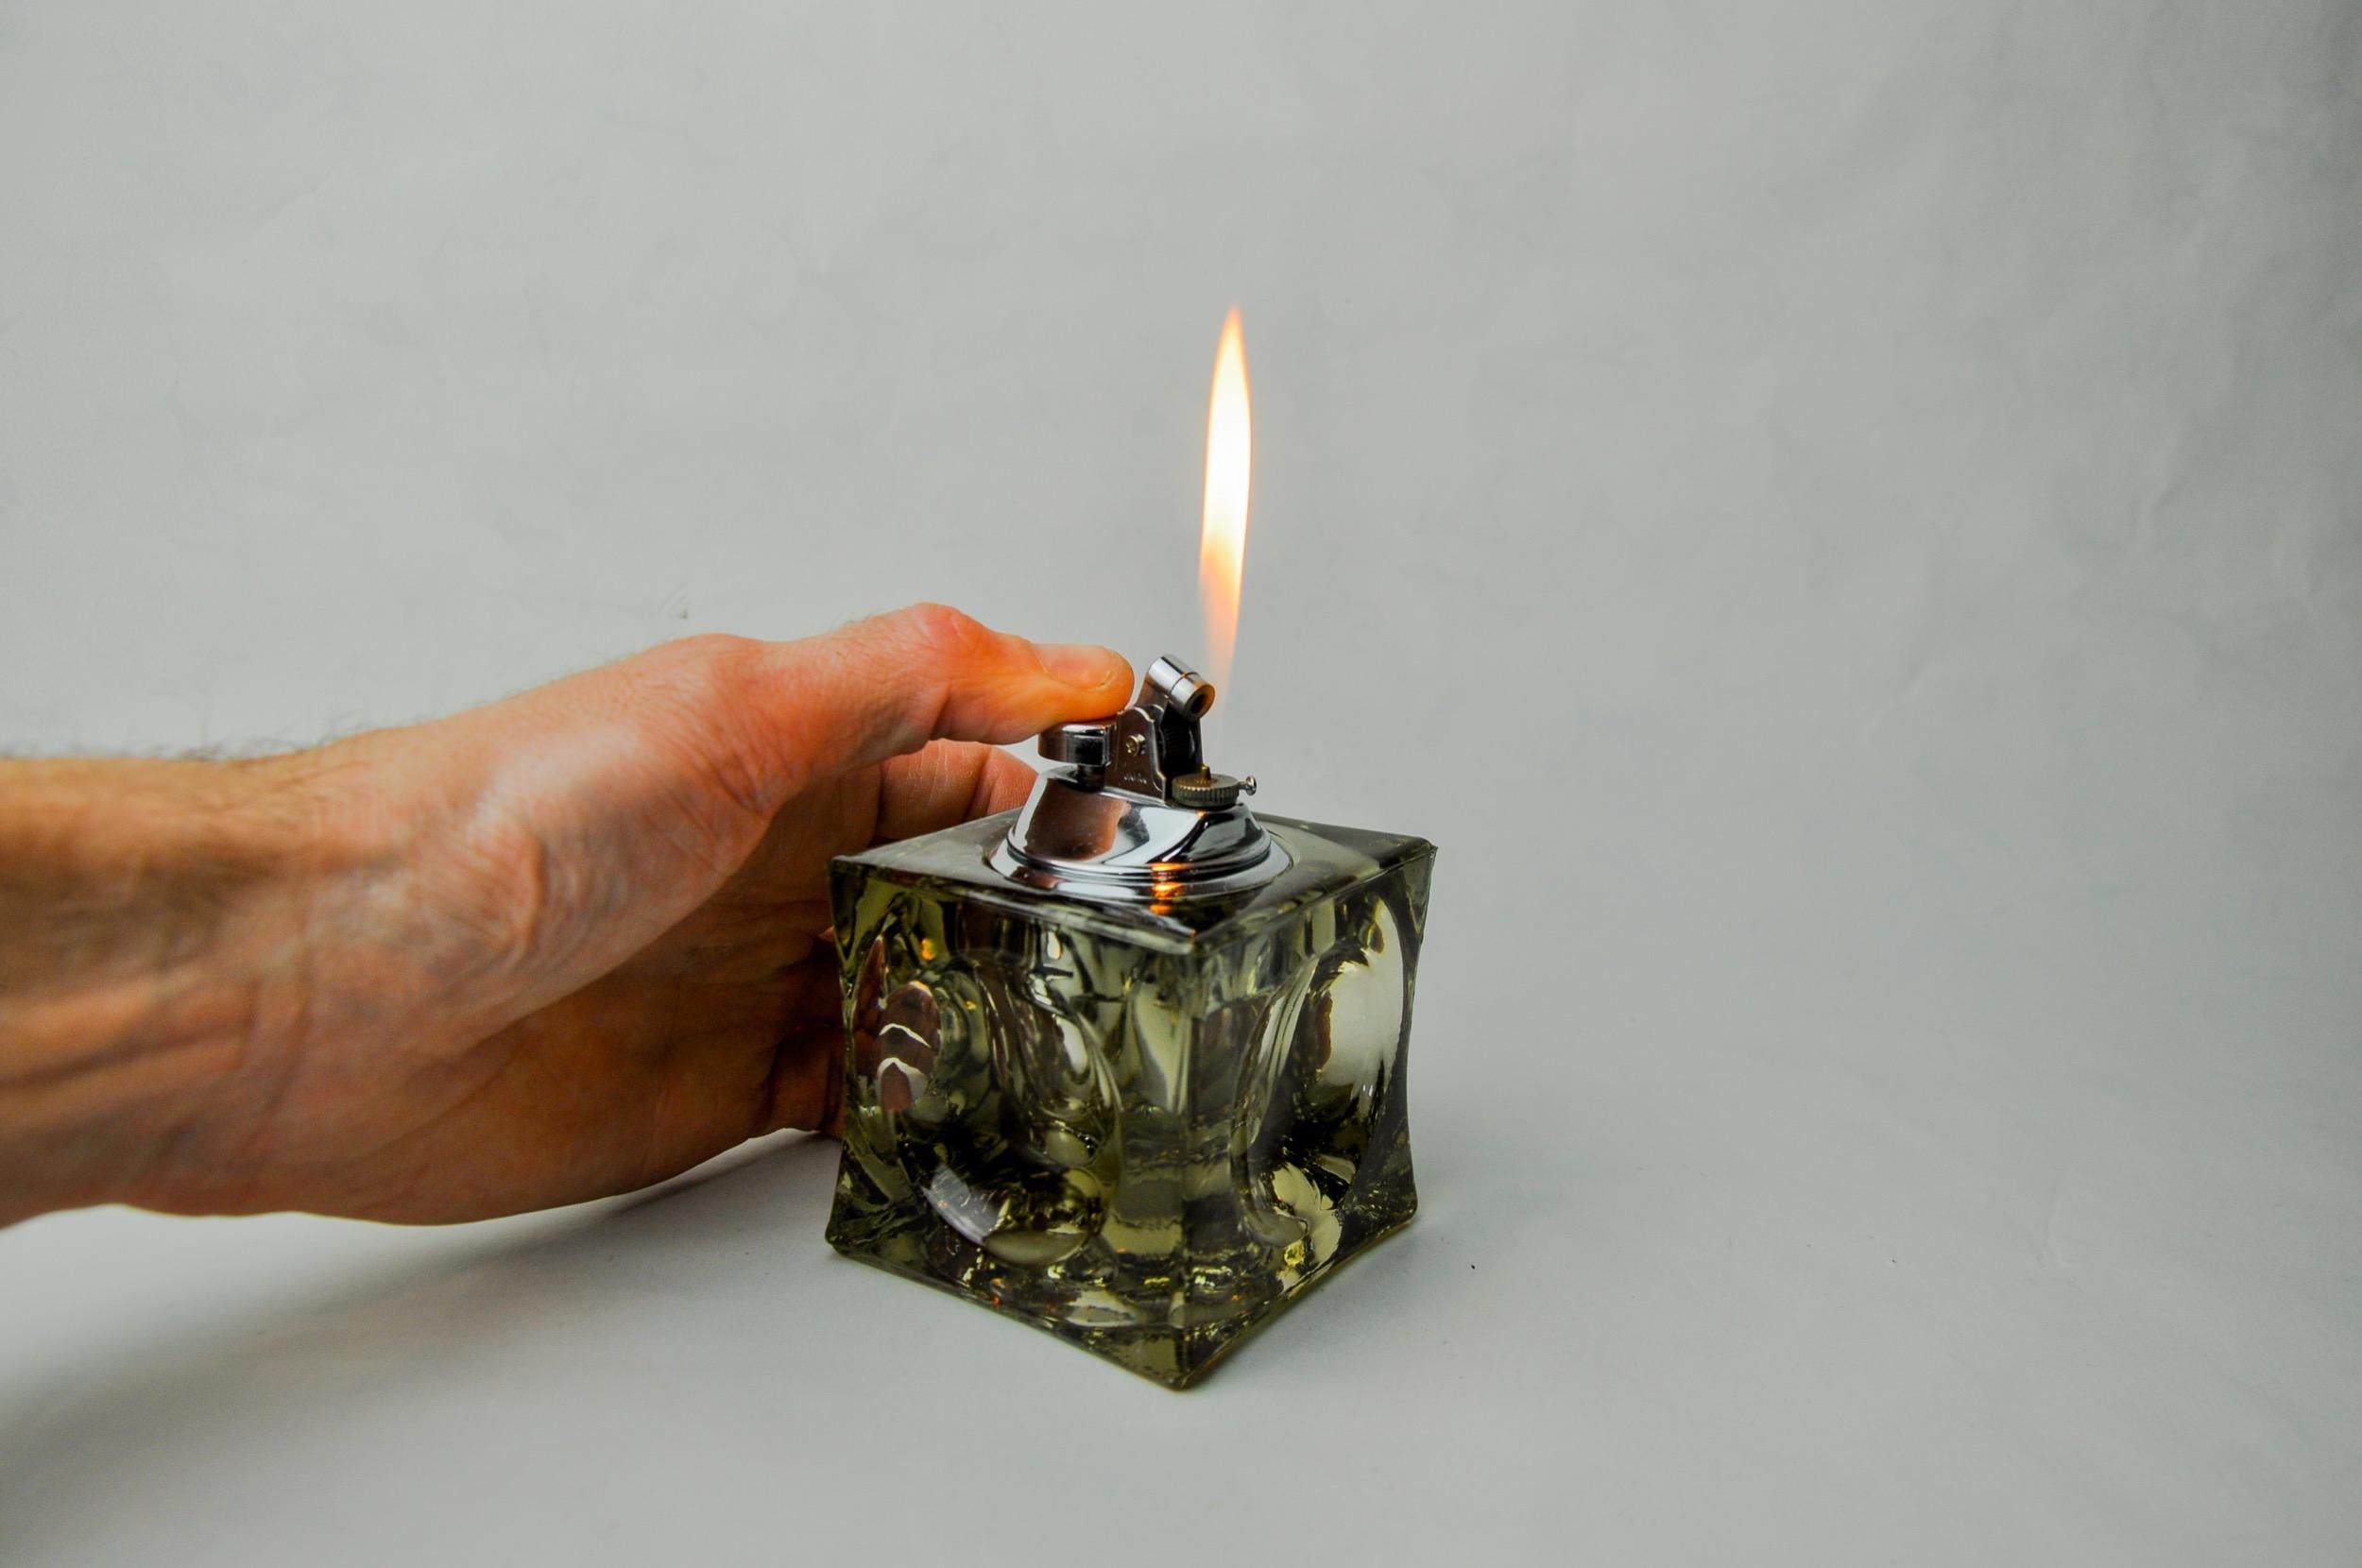 Superb and rare magnifying lighter designed and produced by antonio imperatore in italy in the 1970s. Black murano glass lighter handcrafted by venetian master glassmakers. Decorative object that will bring a real design touch to your interior.